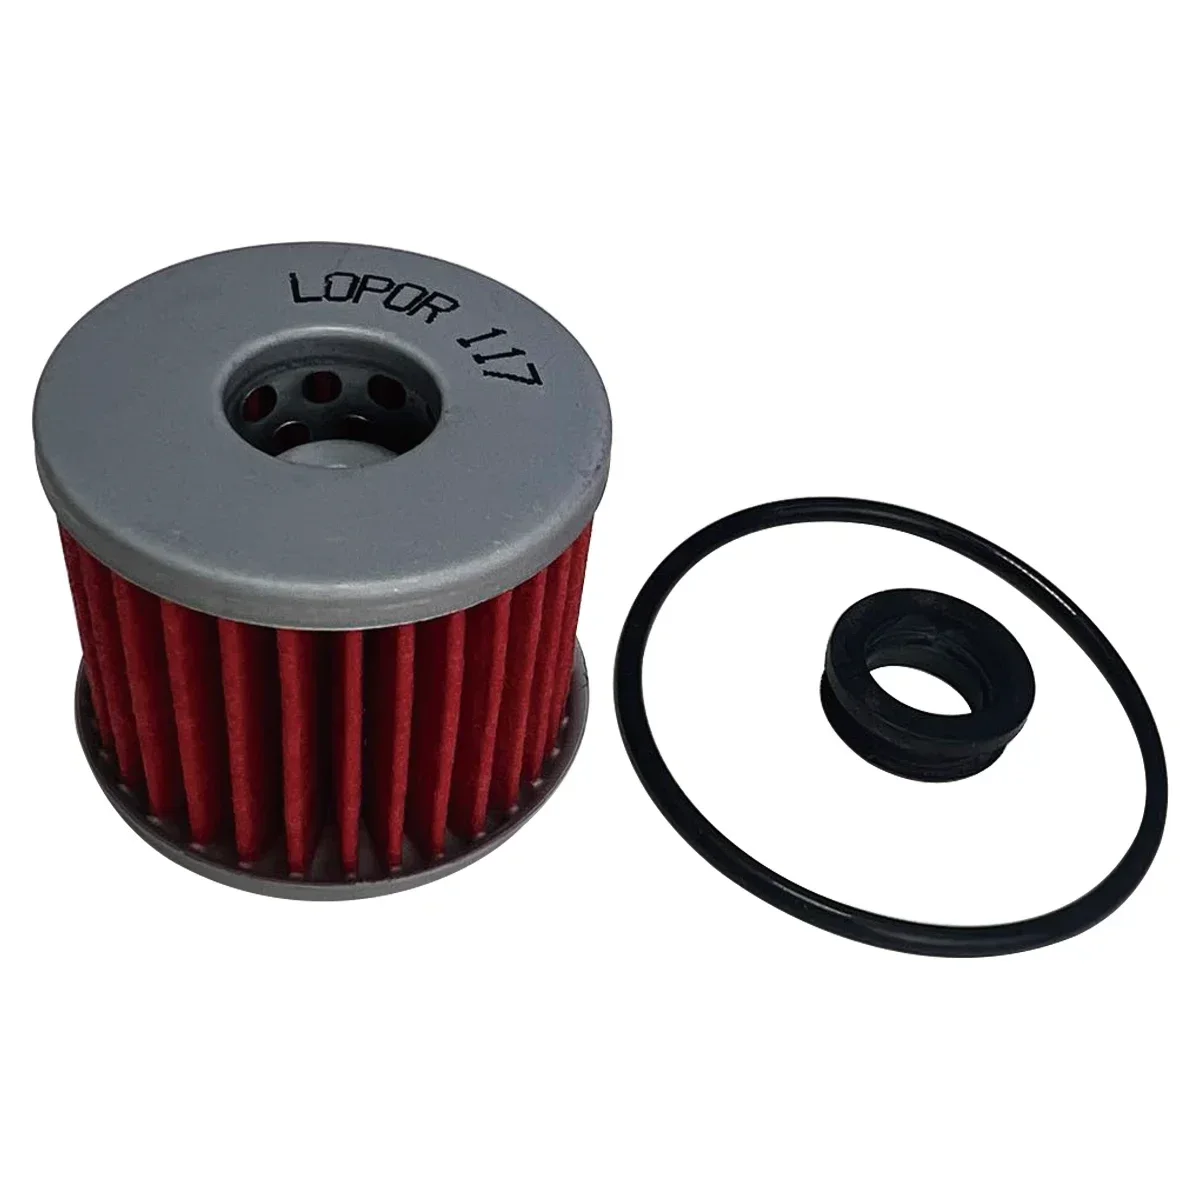 Motorcycle Oil Filter For Honda Scooter C125 A Super Cub 700 Integra NSS750 M Forza DCT 750 Integra NC750 X-ADV 750 ADV750 HF117